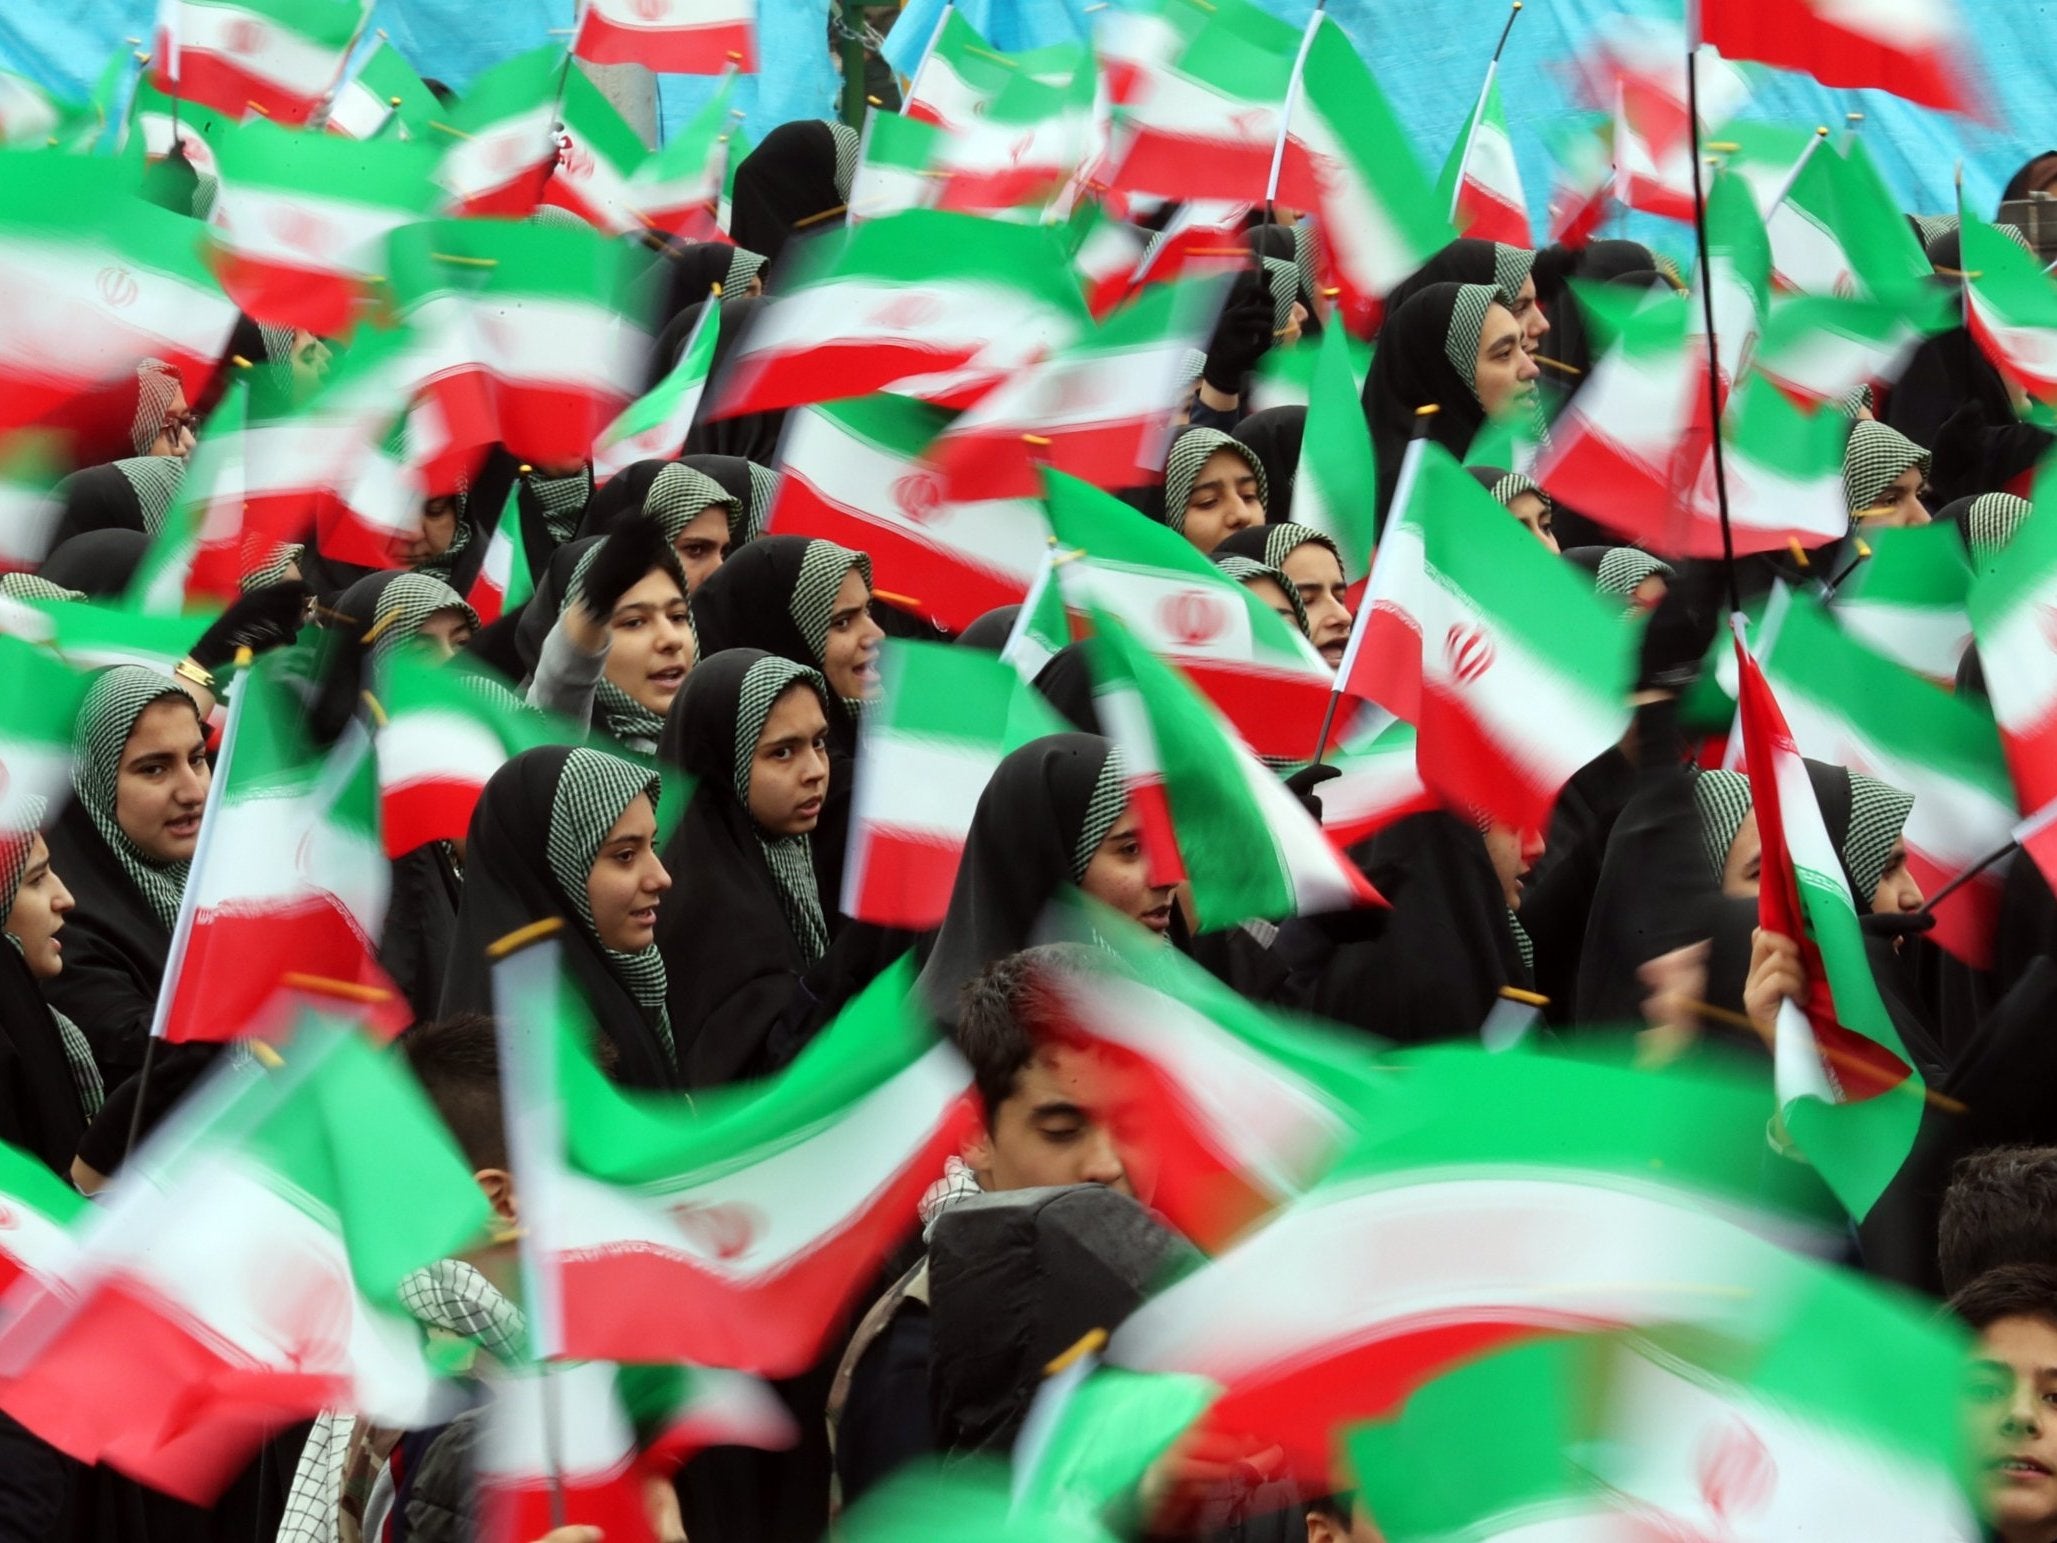 Consider the anniversary of the Iranian Revolution in the context of the 1980-86 war